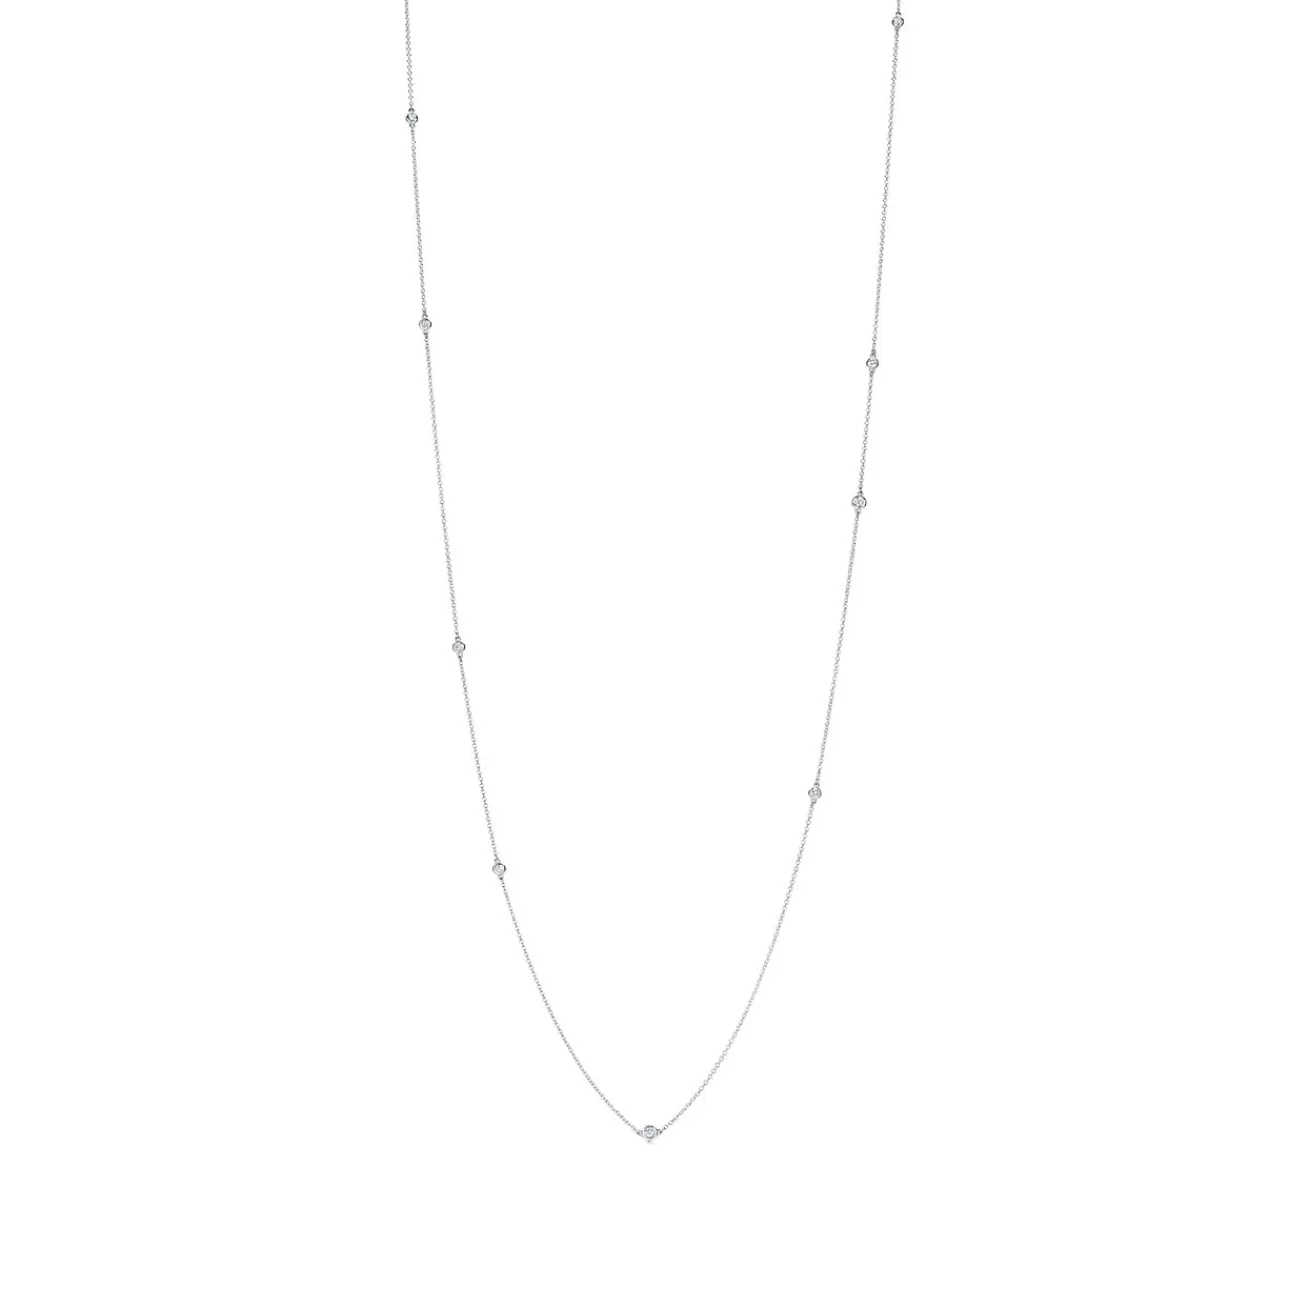 Tiffany & Co. Elsa Peretti® Diamonds by the Yard® sprinkle necklace in sterling silver. | ^ Necklaces & Pendants | Sterling Silver Jewelry